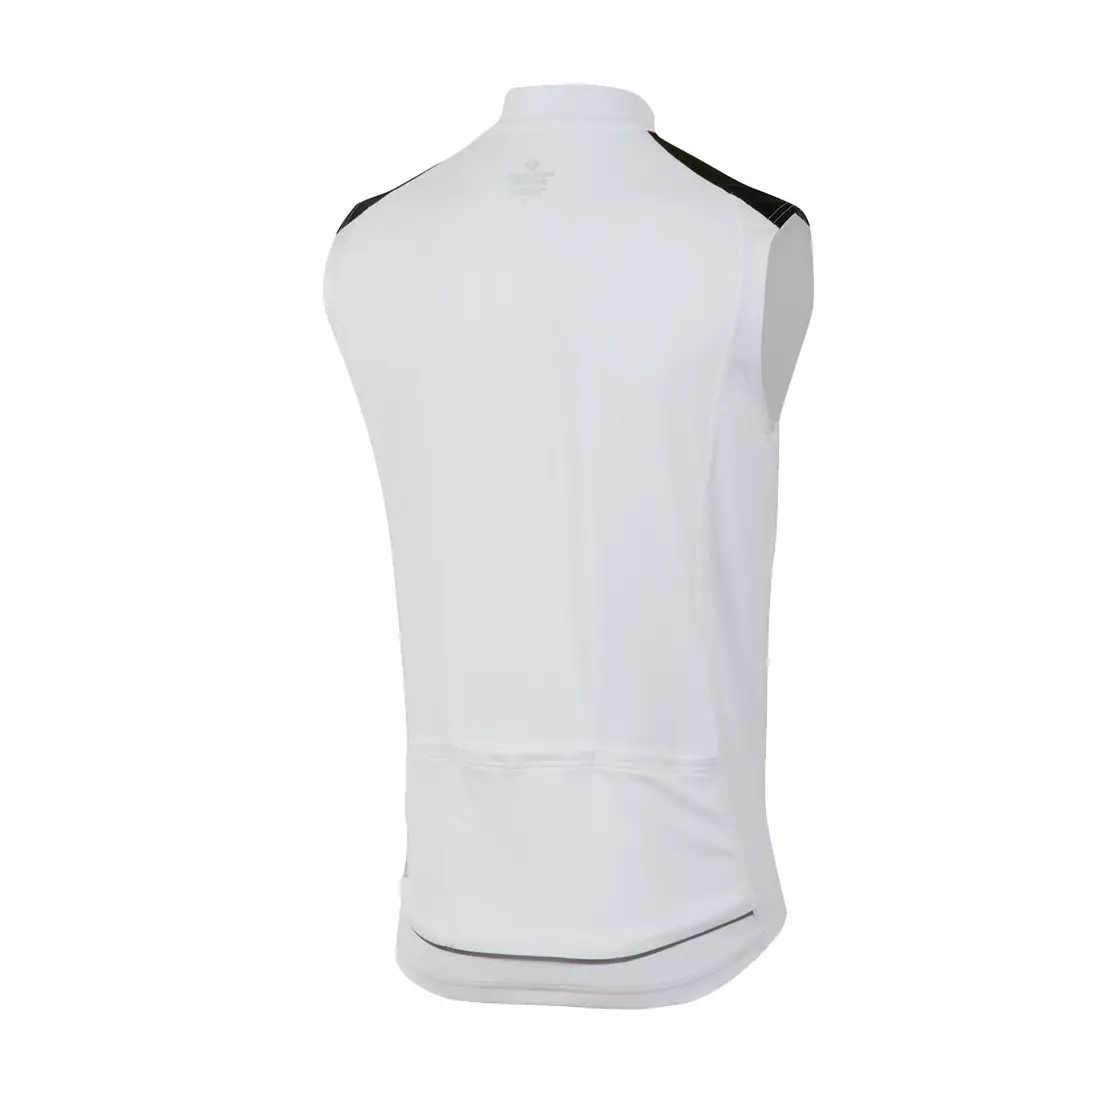 PEARL IZUMI SELECT QUEST - men's sleeveless cycling jersey 11121408-508